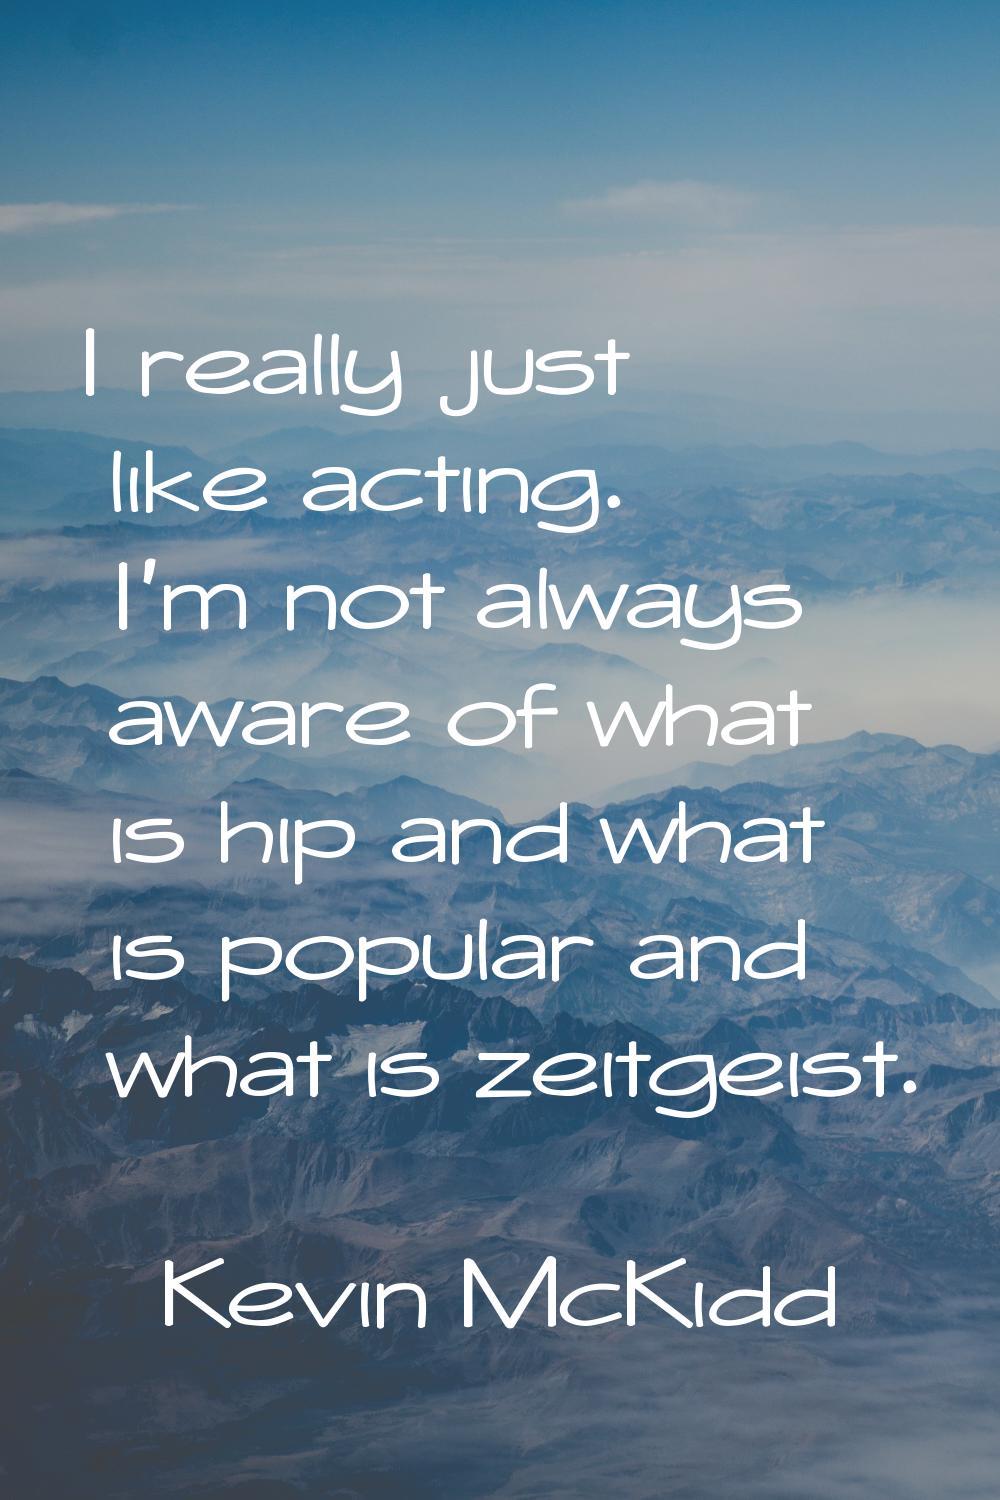 I really just like acting. I'm not always aware of what is hip and what is popular and what is zeit